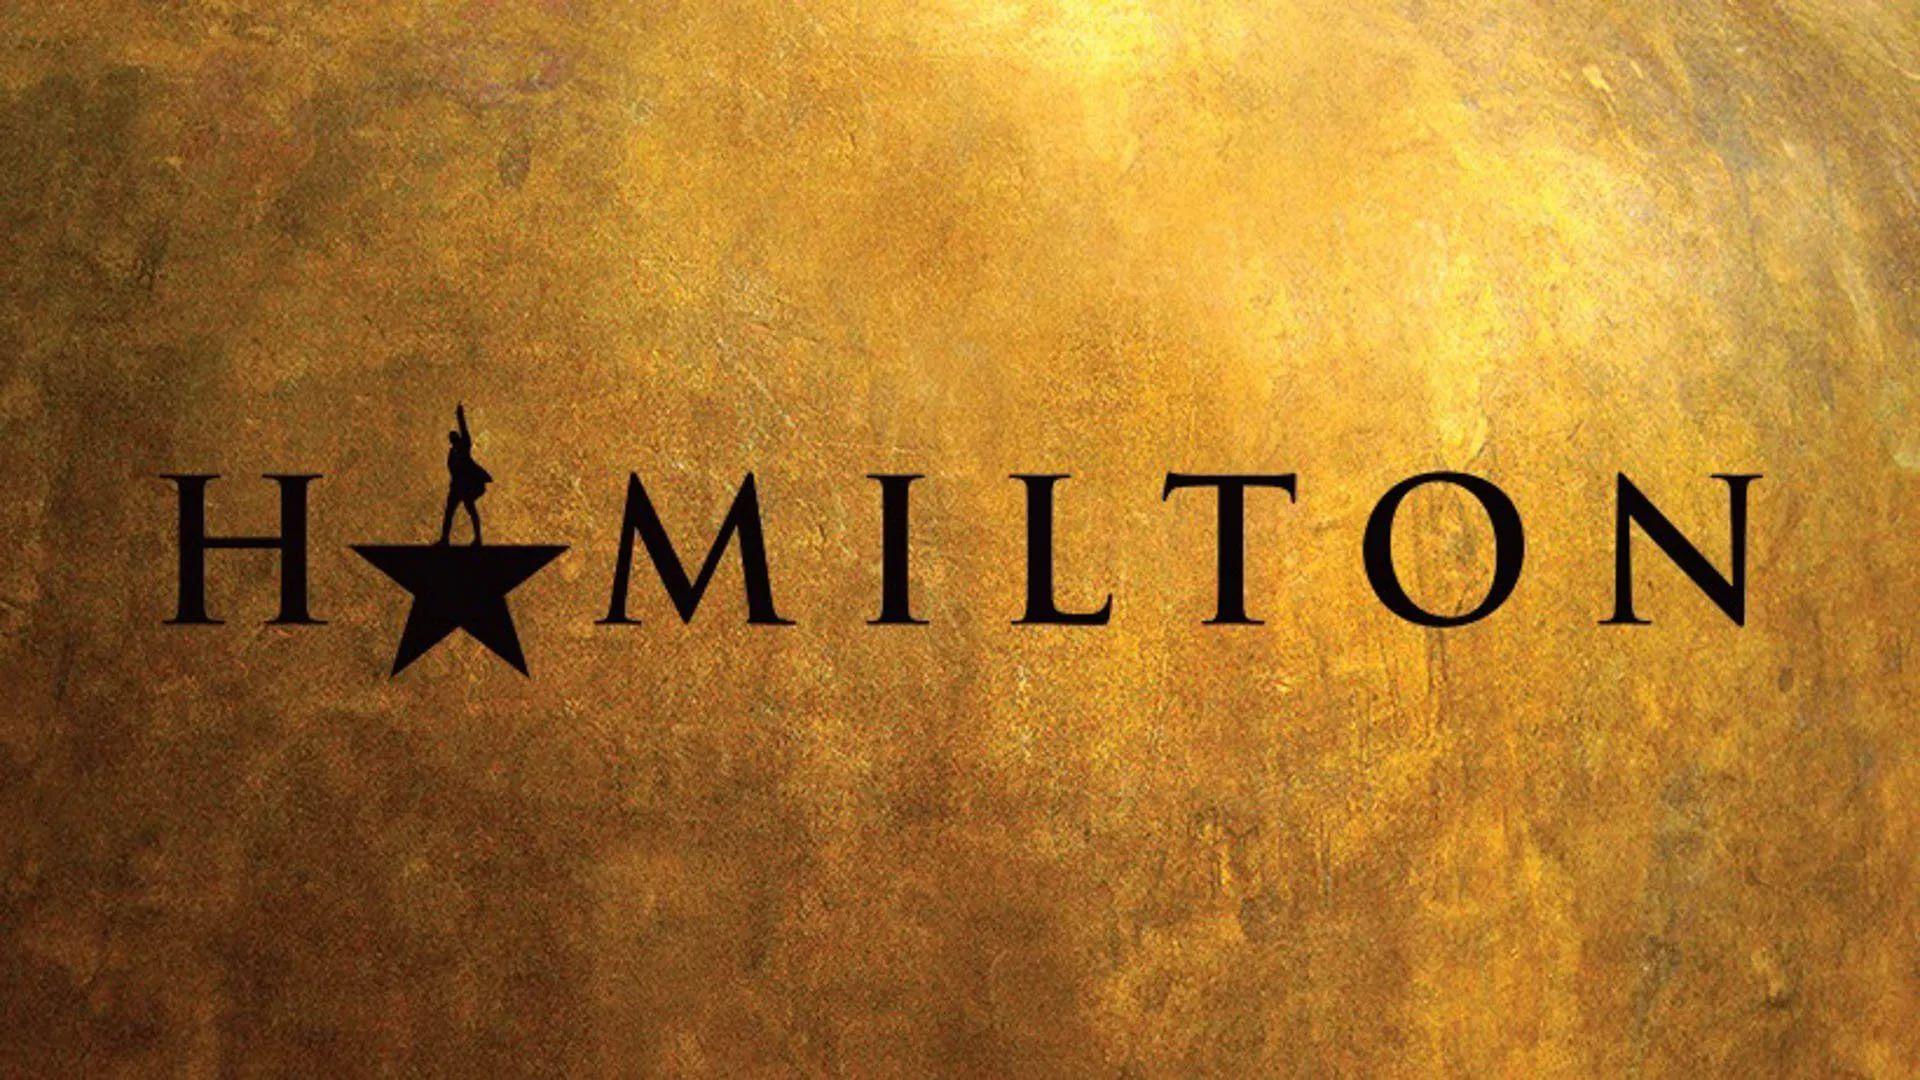 The logo for the Broadway musical Hamilton, which features a person on a star. - Hamilton